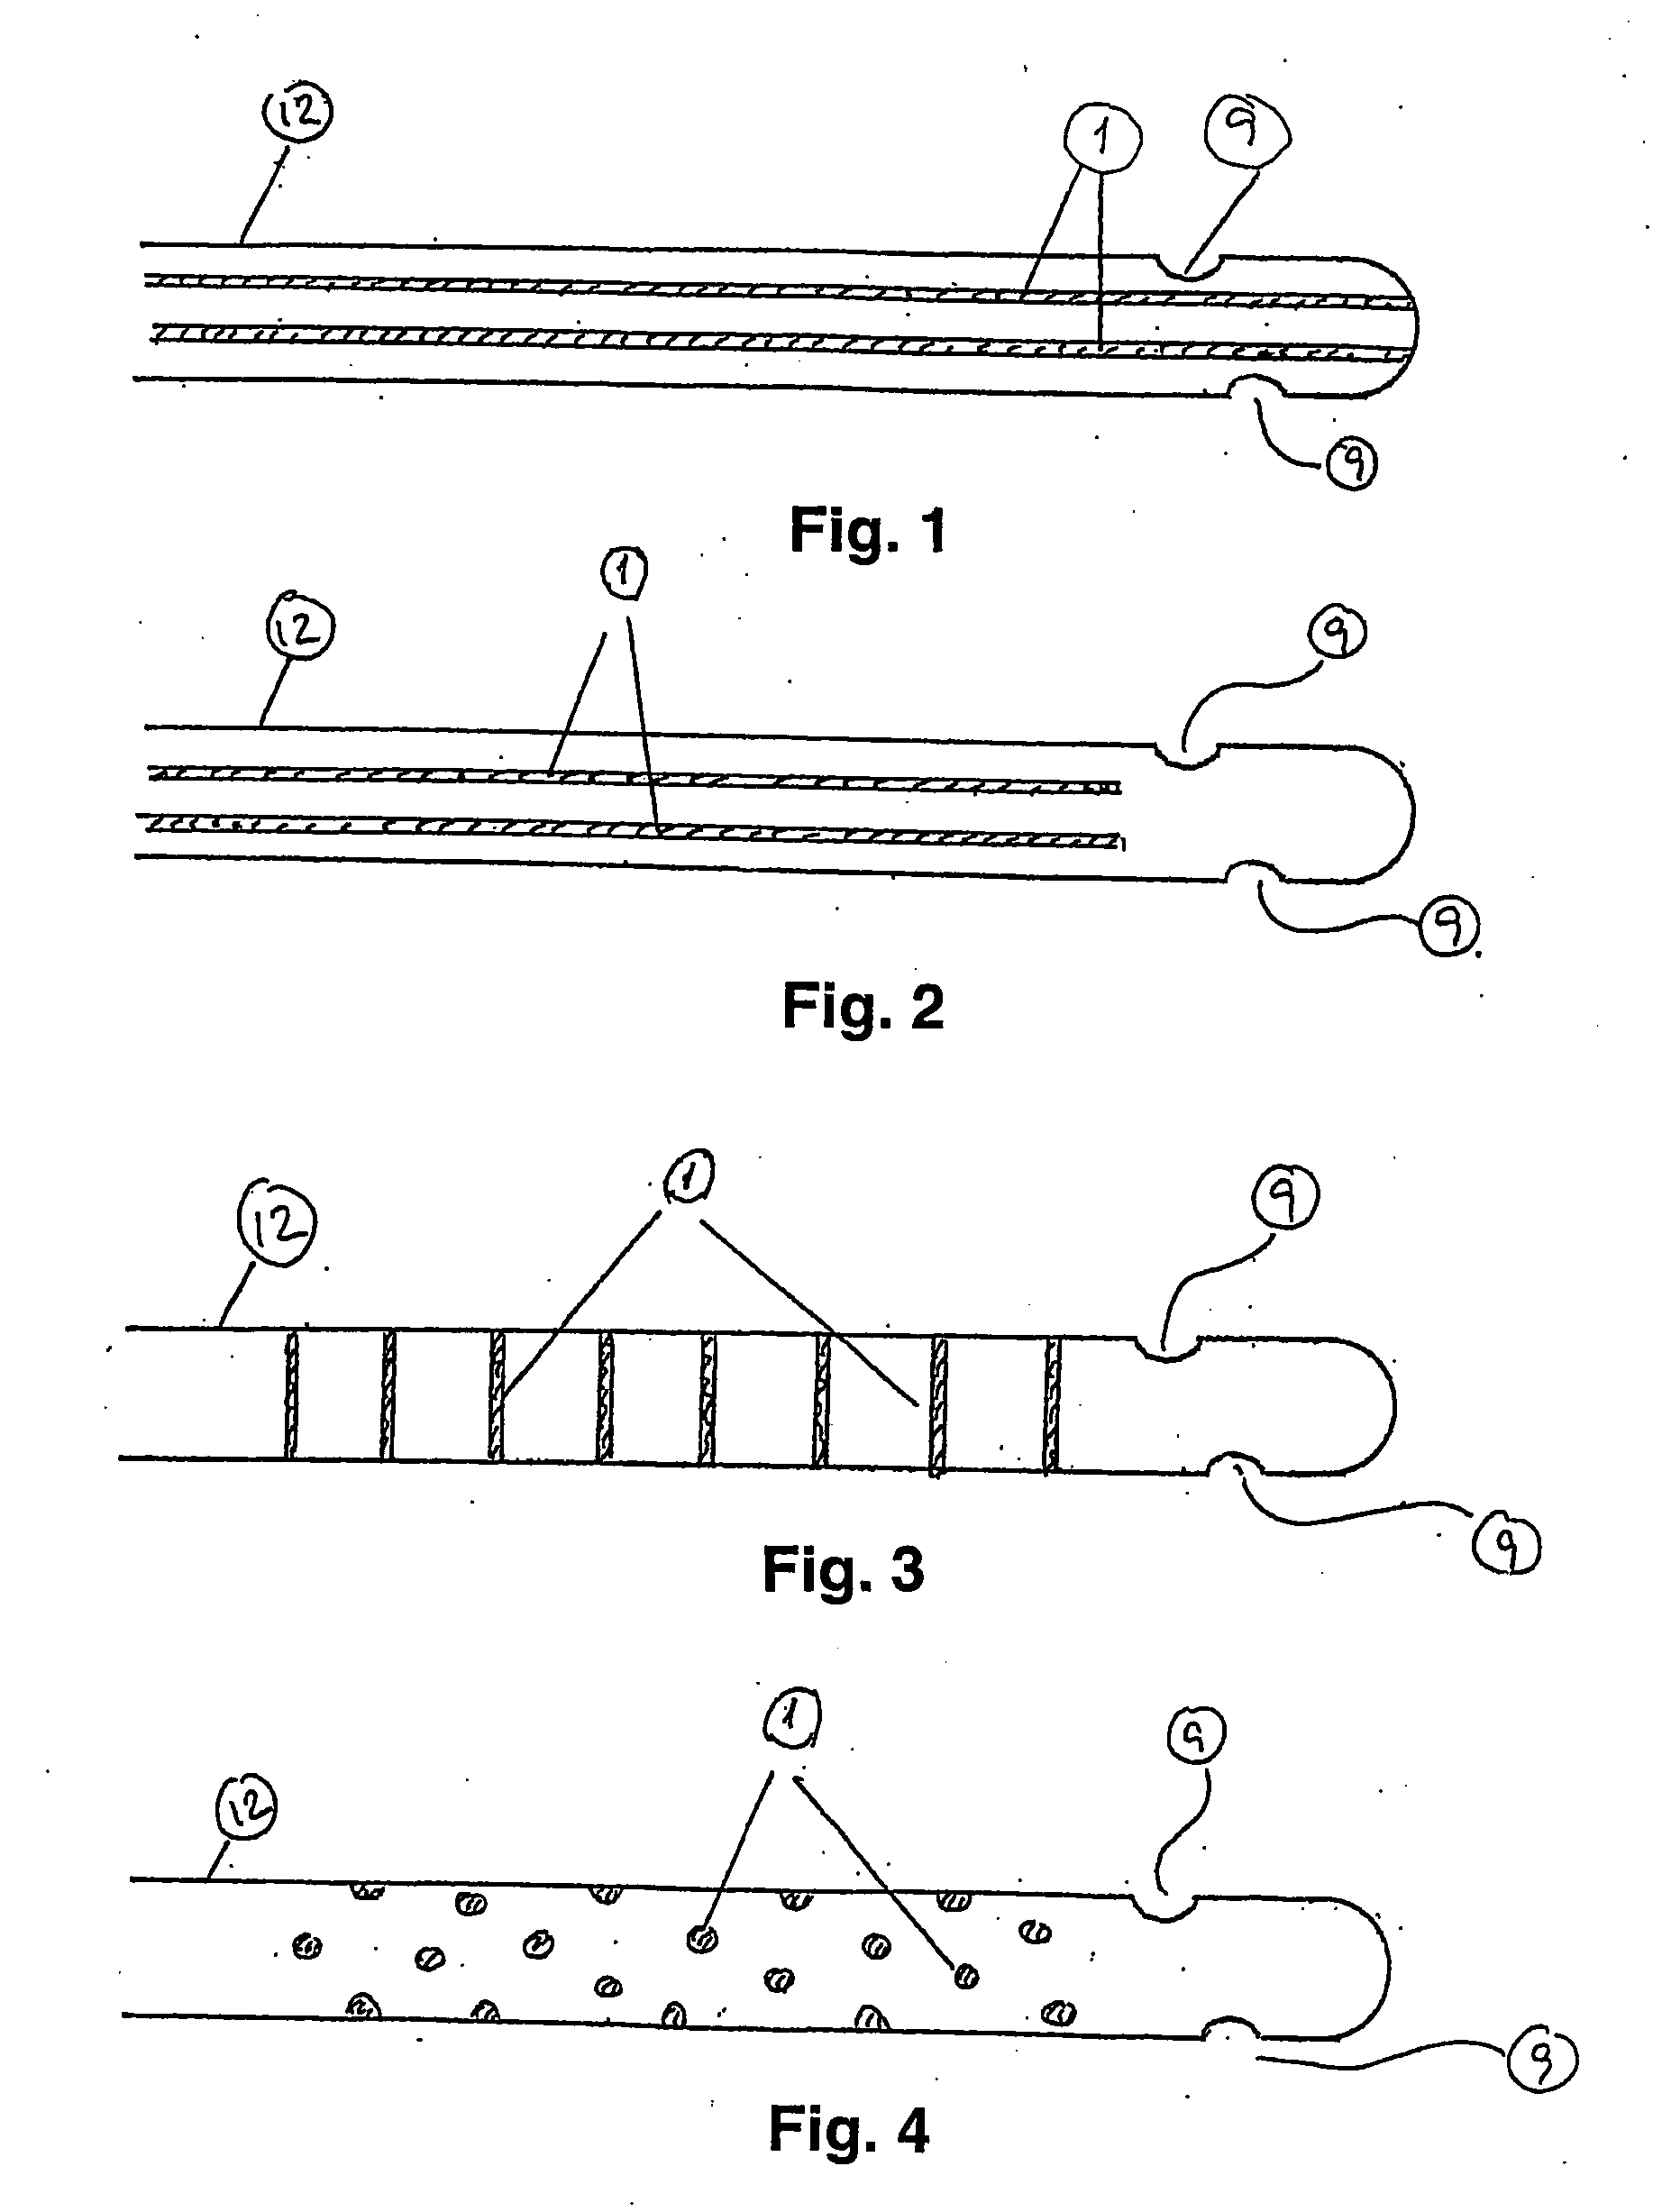 Urinary catheter device with a pharmaceutically active composition